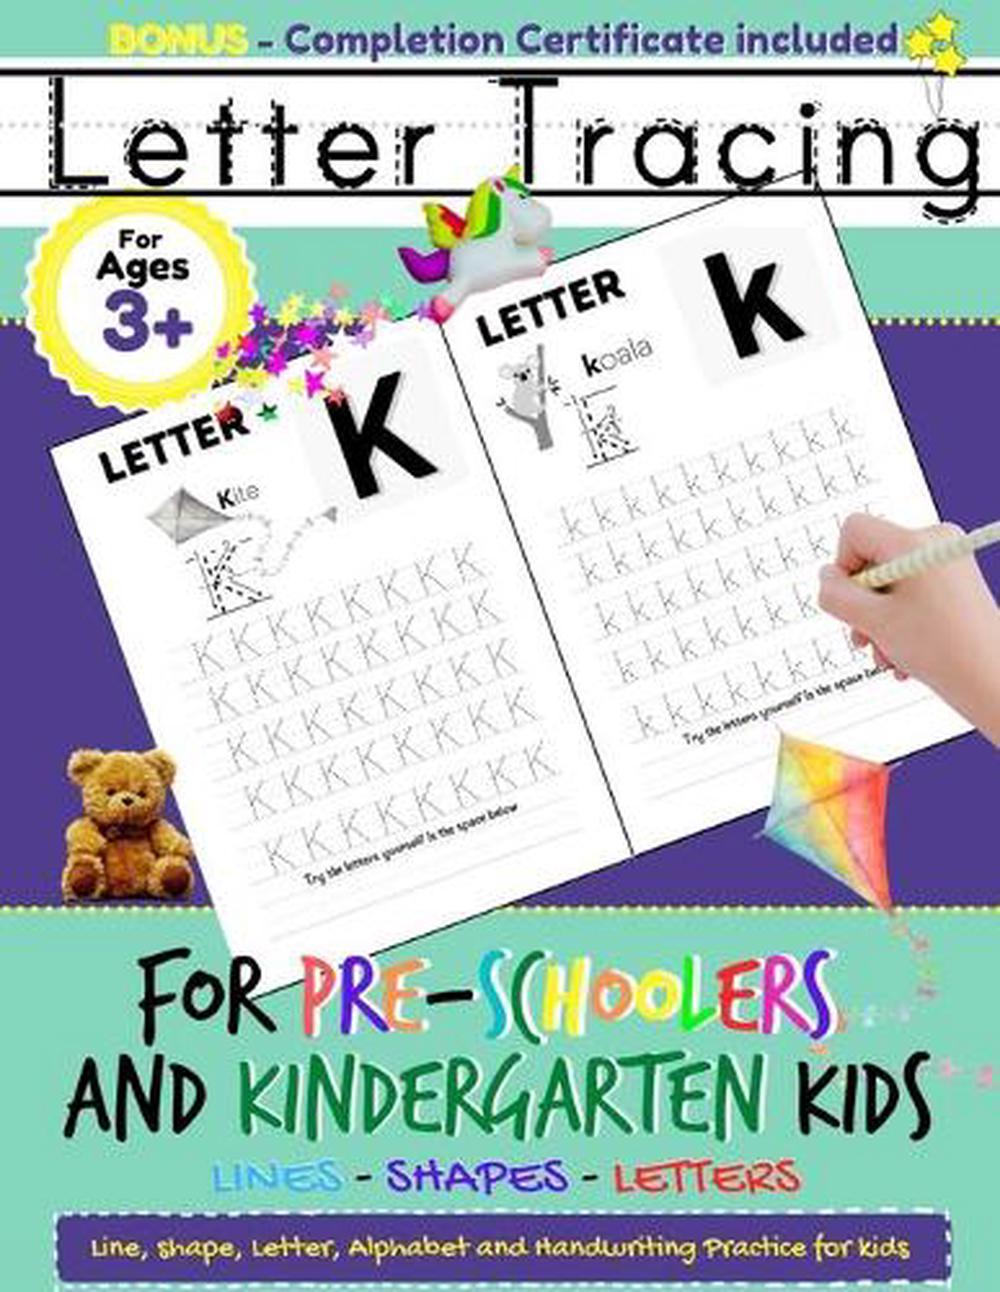 Download Letter Tracing For Pre Schoolers And Kindergarten Kids Alphabet Handwriting Practice For Kids 3 5 To Practice Pen Control Line Tracing Letters And Shapes Abc Print Handwriting Book By Romney Nelson Paperback